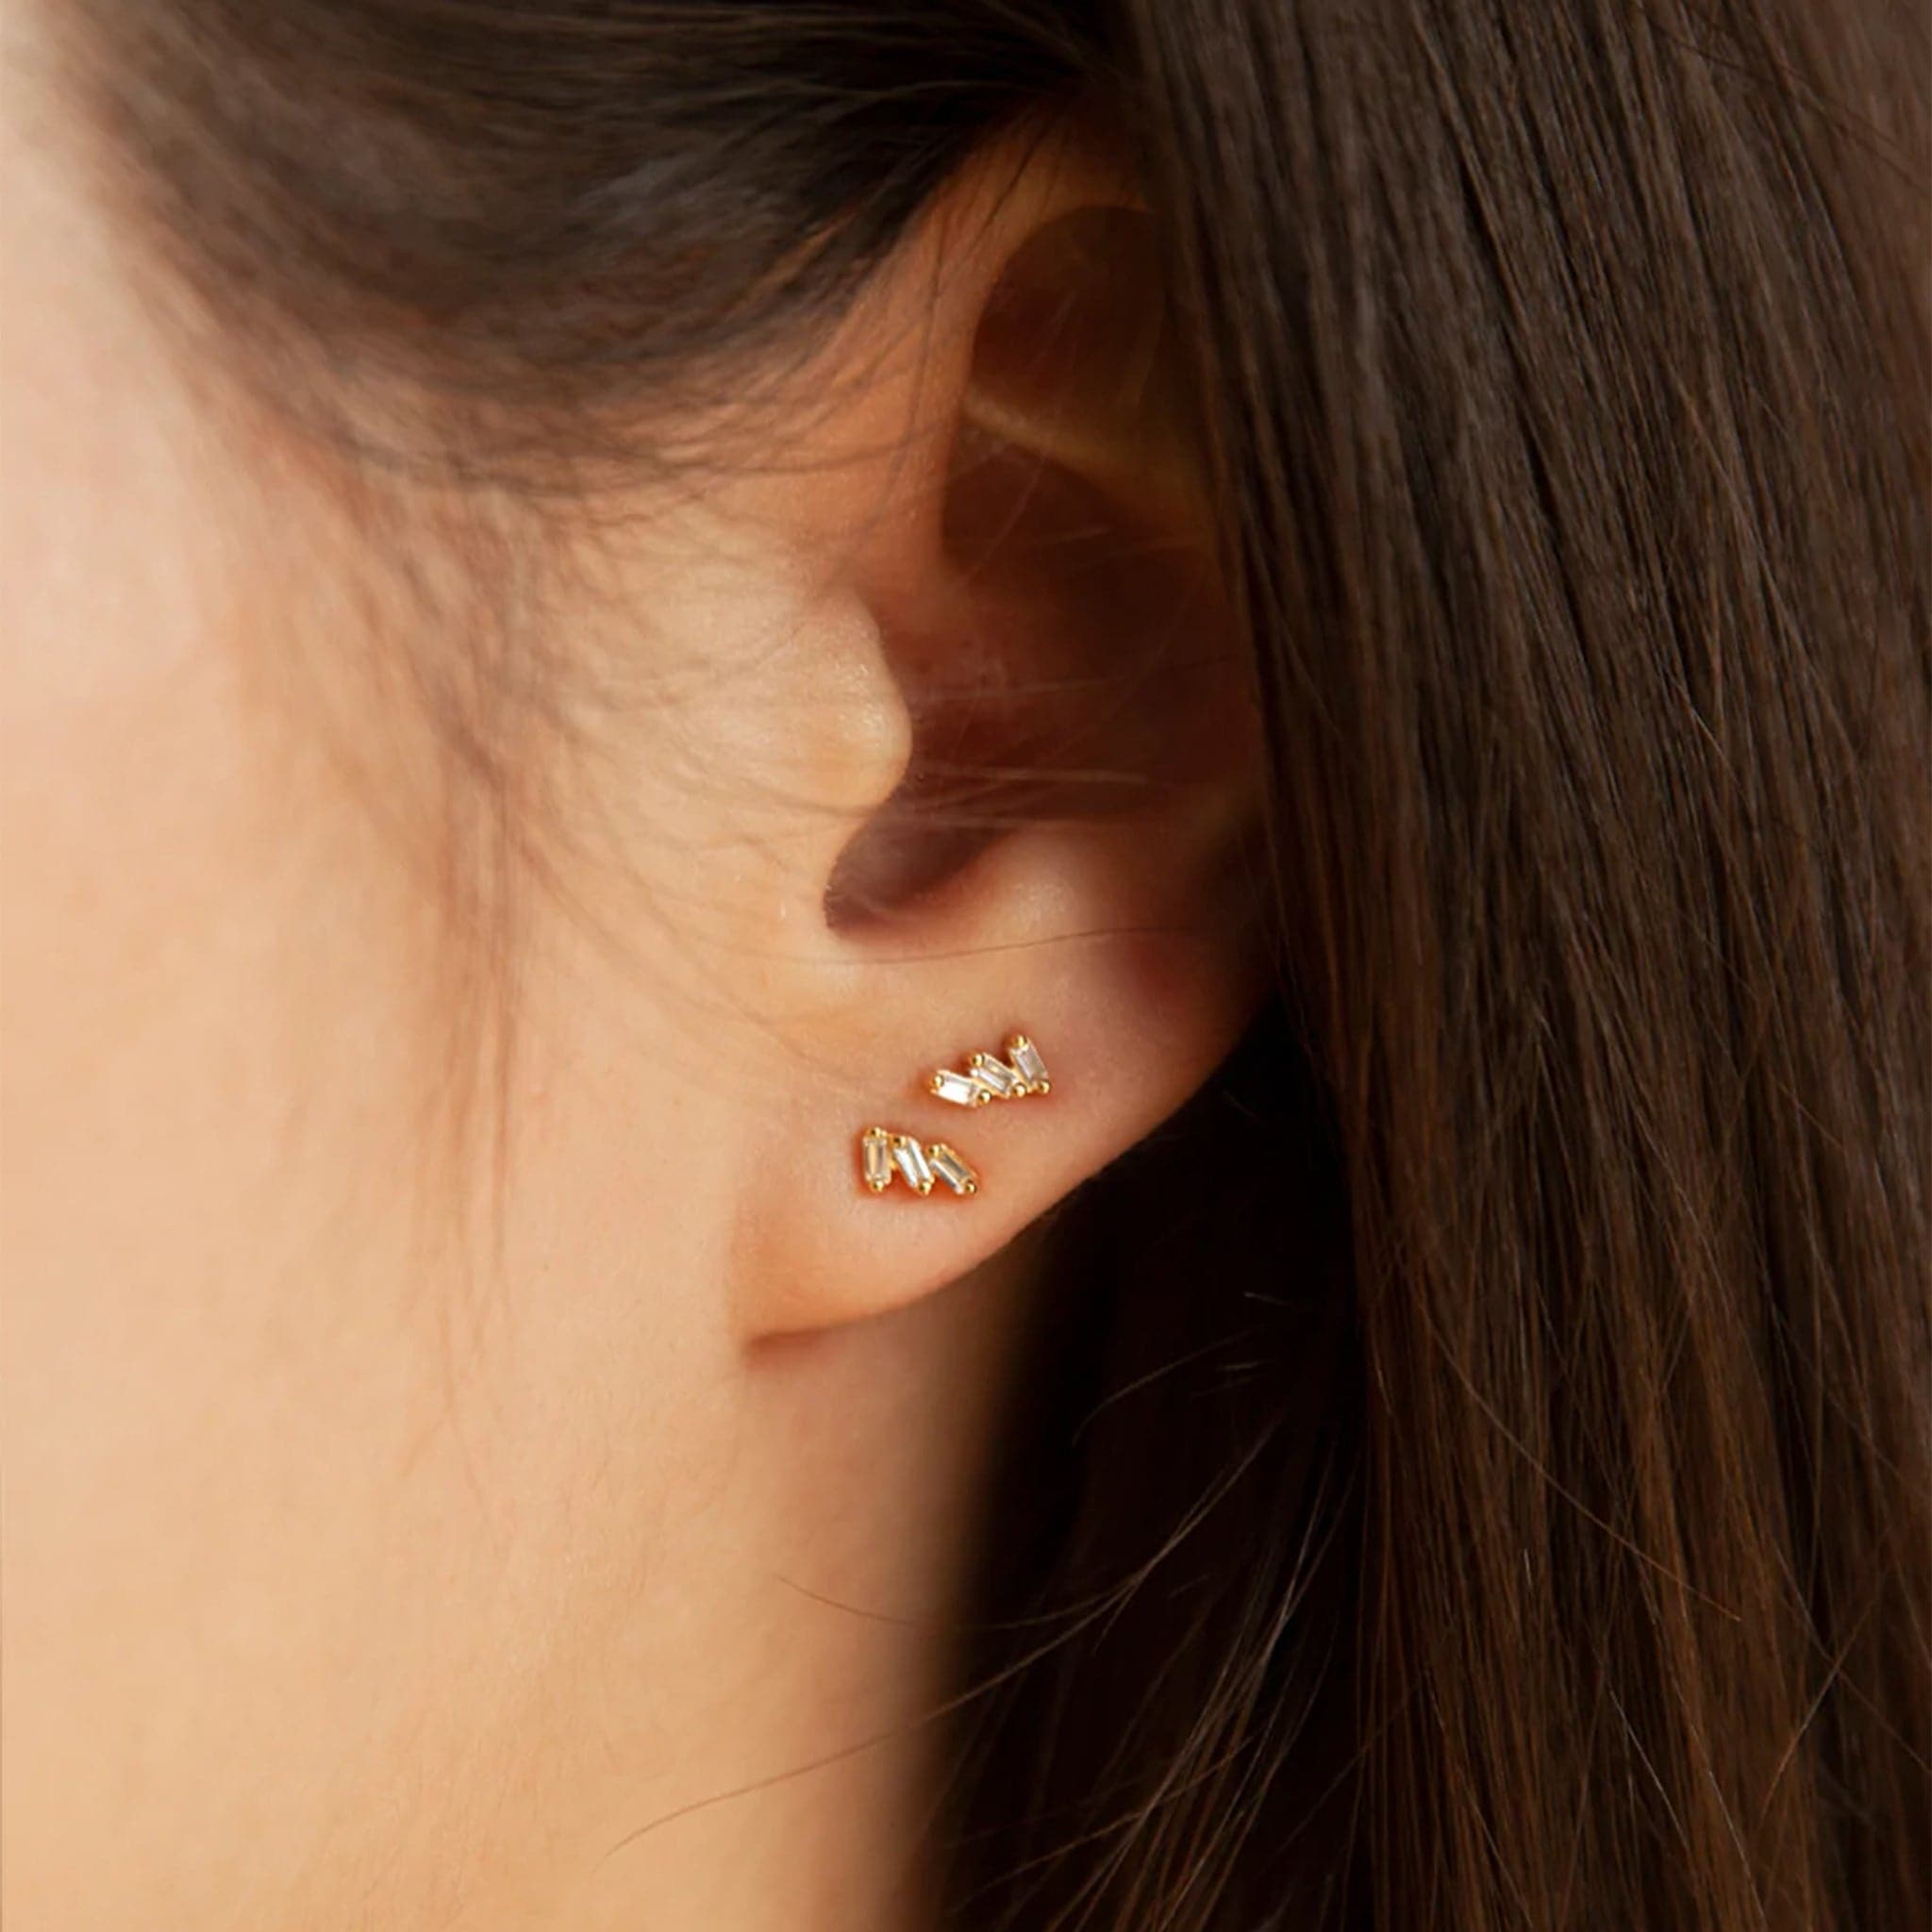 A cubic zirconia stud earring with 3 tiny baguette stones.